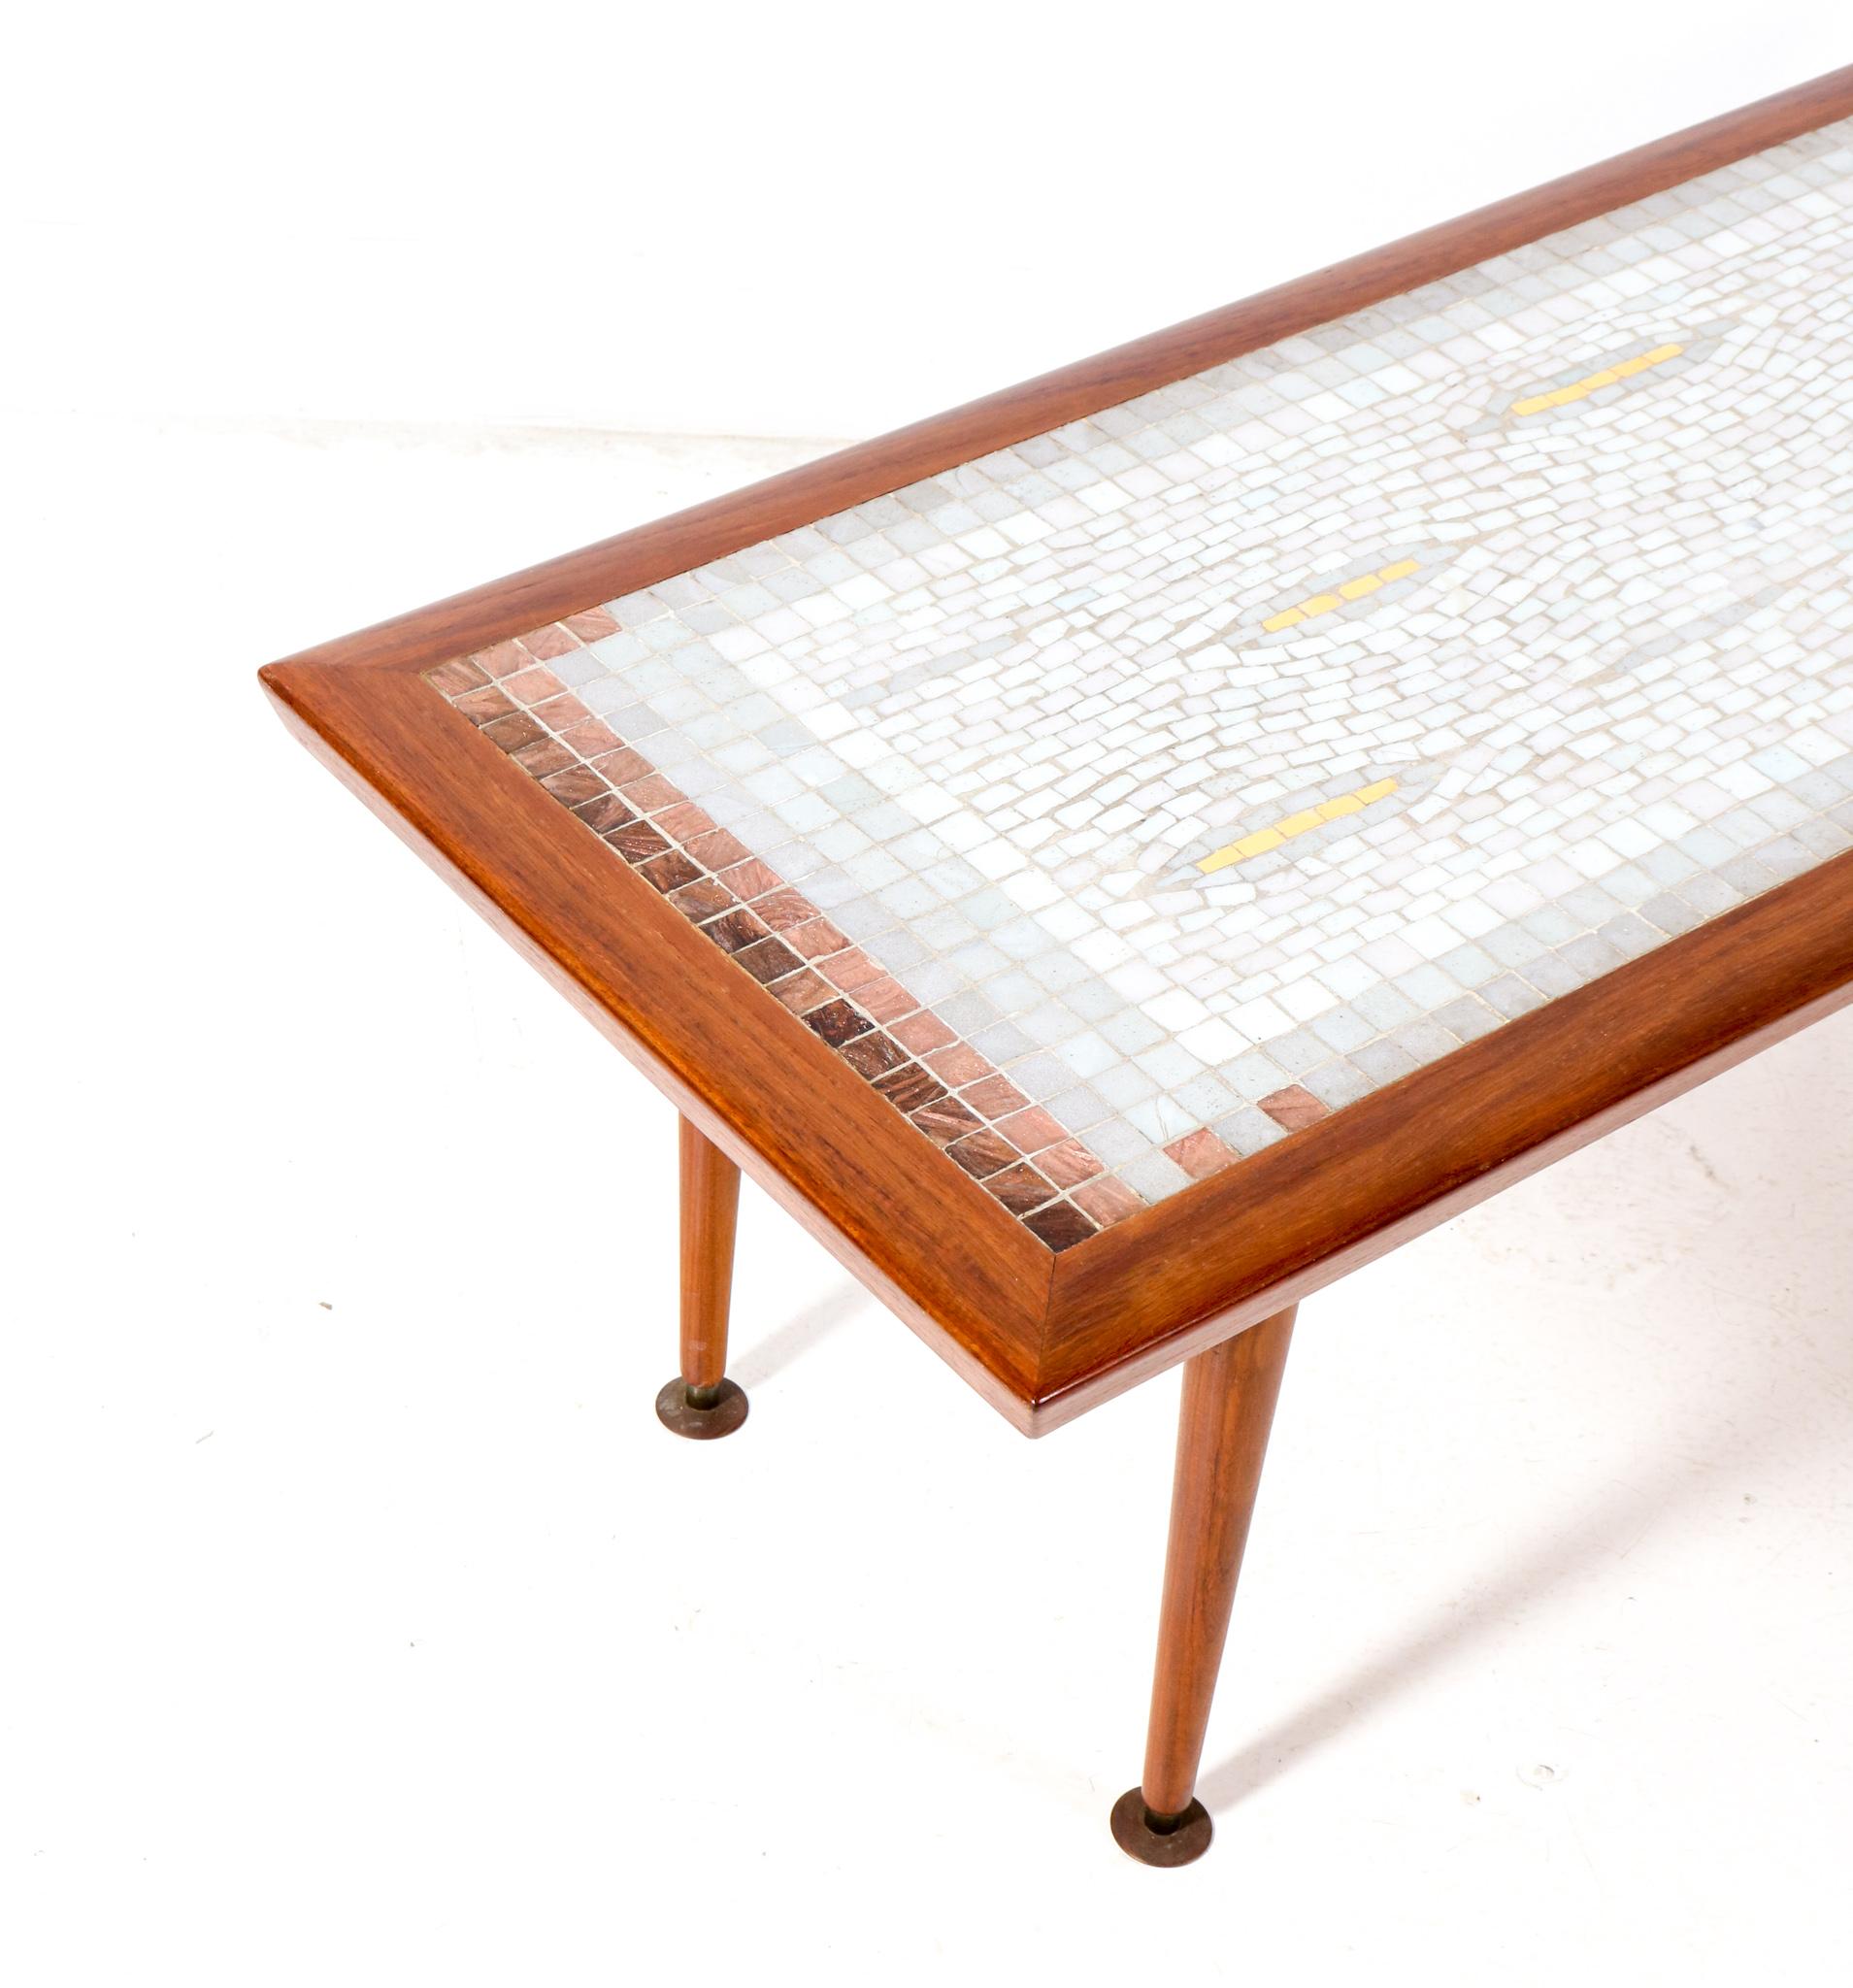 Amazing Mid-Century Modern coffee table.
Design by Berthold Muller.
Striking German design from the 1960s.
This amazing coffee table consists of four solid teak and brass legs with the original solid teak top inlaid with mosaic tiles.
This